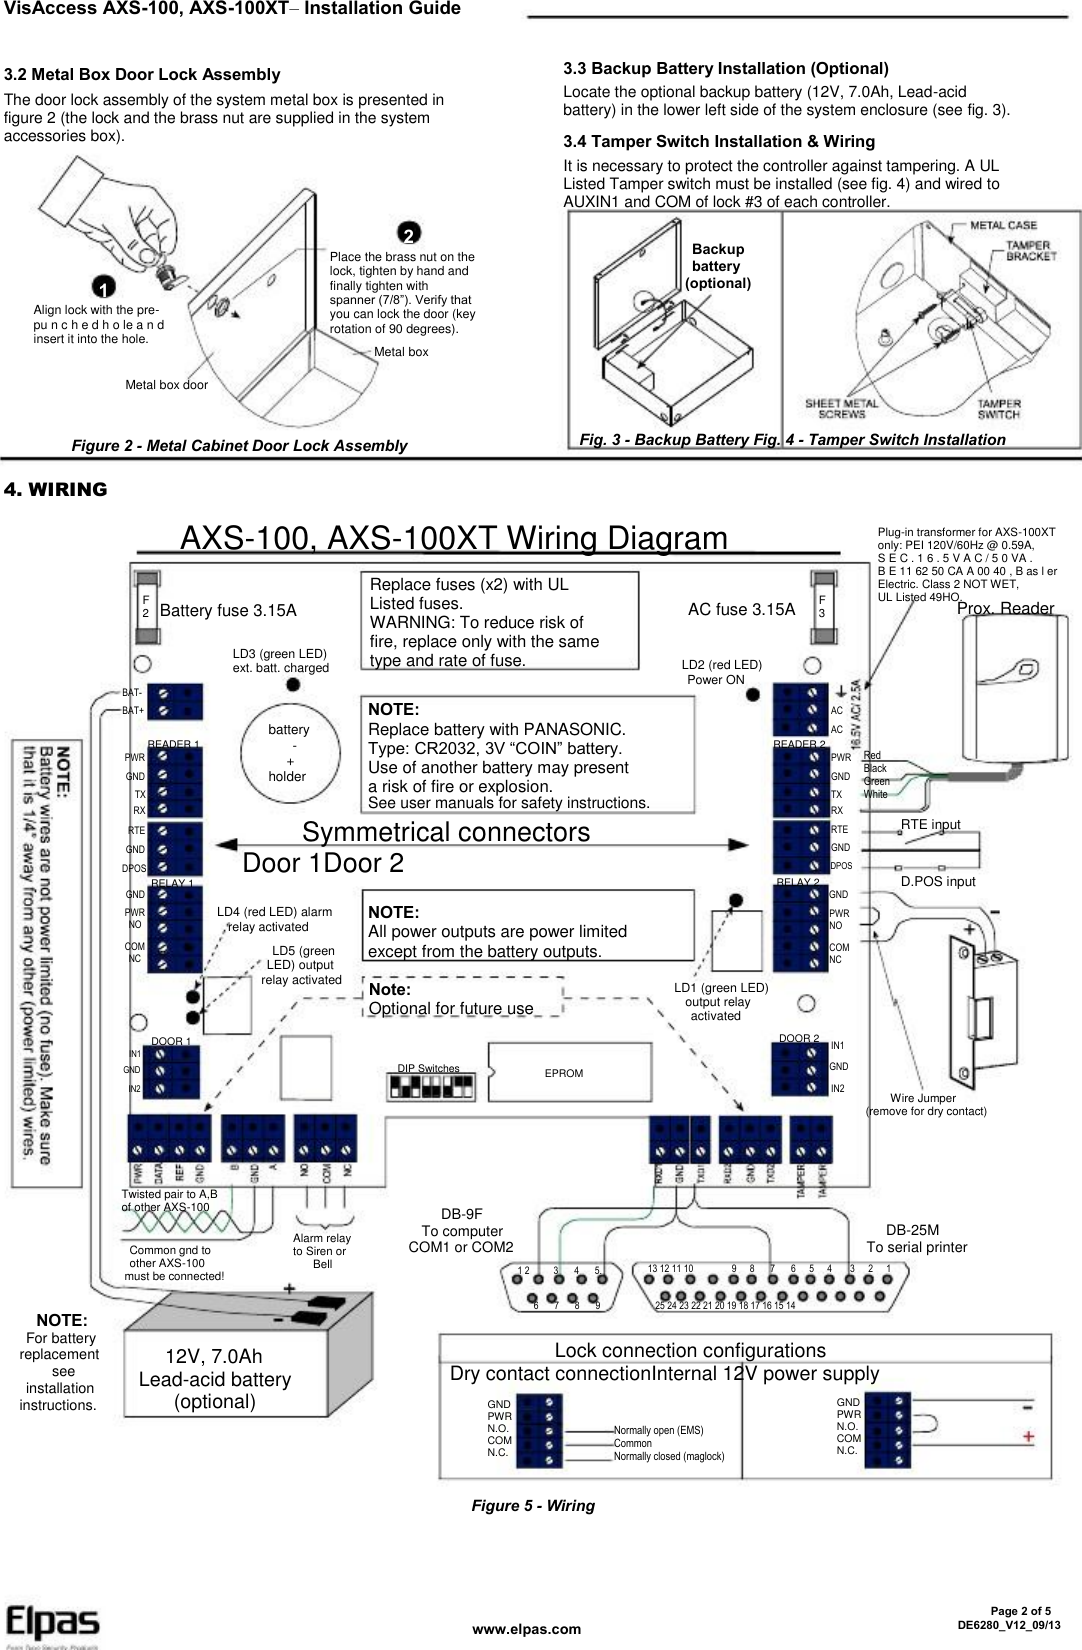 VisAccess AXS-100, AXS-100XT– Installation Guide 3.2 Metal Box Door Lock Assembly The door lock assembly of the system metal box is presented in figure 2 (the lock and the brass nut are supplied in the system accessories box). 3.3 Backup Battery Installation (Optional) Locate the optional backup battery (12V, 7.0Ah, Lead-acid battery) in the lower left side of the system enclosure (see fig. 3). 3.4 Tamper Switch Installation &amp; Wiring It is necessary to protect the controller against tampering. A UL Listed Tamper switch must be installed (see fig. 4) and wired to AUXIN1 and COM of lock #3 of each controller. 2 1 Align lock with the pre- pu n c h e d h o le a n d insert it into the hole. Place the brass nut on the lock, tighten by hand and finally tighten with spanner (7/8”). Verify that you can lock the door (key rotation of 90 degrees). Metal box Metal box door   Backup   battery (optional) Figure 2 - Metal Cabinet Door Lock Assembly Fig. 3 - Backup Battery Fig. 4 - Tamper Switch Installation 4. WIRING AXS-100, AXS-100XT Wiring Diagram F 2 Battery fuse 3.15A LD3 (green LED) ext. batt. charged Replace fuses (x2) with UL Listed fuses. WARNING: To reduce risk of fire, replace only with the same type and rate of fuse. NOTE: Replace battery with PANASONIC. Type: CR2032, 3V “COIN” battery. Use of another battery may present a risk of fire or explosion. AC fuse 3.15A LD2 (red LED)   Power ON F 3 Plug-in transformer for AXS-100XT only: PEI 120V/60Hz @ 0.59A, S E C . 1 6 . 5 V A C / 5 0 VA . B E 11 62 50 CA A 00 40 , B as l er Electric. Class 2 NOT WET, UL Listed 49HO. Prox. Reader BAT- BAT+ READER 1 PWR GND TX RX RTE GND DPOS RELAY 1 GND PWR  NO COM  NC AC AC READER 2 PWR GND TX RX RTE GND DPOS battery     -    + holder See user manuals for safety instructions. Red Black Green White      Symmetrical connectors Door 1Door 2 LD4 (red LED) alarm   relay activated   LD5 (green   LED) output relay activated RTE input RELAY 2 GND PWR NO COM NC D.POS input NOTE: All power outputs are power limited except from the battery outputs. Note: Optional for future use DIP Switches LD1 (green LED)   output relay    activated DOOR 2 IN1 GND IN2 DOOR 1 IN1 GND IN2 EPROM      Wire Jumper (remove for dry contact) Twisted pair to A,B of other AXS-100   Common gnd to   other AXS-100 must be connected! Alarm relay to Siren or     Bell      DB-9F   To computer COM1 or COM2 1 2 6 3 7 4 8 5. 9 13 12 11 10 9 8 7 6 5 4 3    DB-25M To serial printer 2 1 25 24 23 22 21 20 19 18 17 16 15 14 NOTE:   For battery replacement      see   installation instructions.    12V, 7.0Ah Lead-acid battery     (optional)             Lock connection configurations Dry contact connectionInternal 12V power supply GND PWR N.O. COM N.C. Normally open (EMS) Common Normally closed (maglock) GND PWR N.O. COM N.C. Figure 5 - Wiring www.elpas.com       Page 2 of 5 DE6280_V12_09/13 